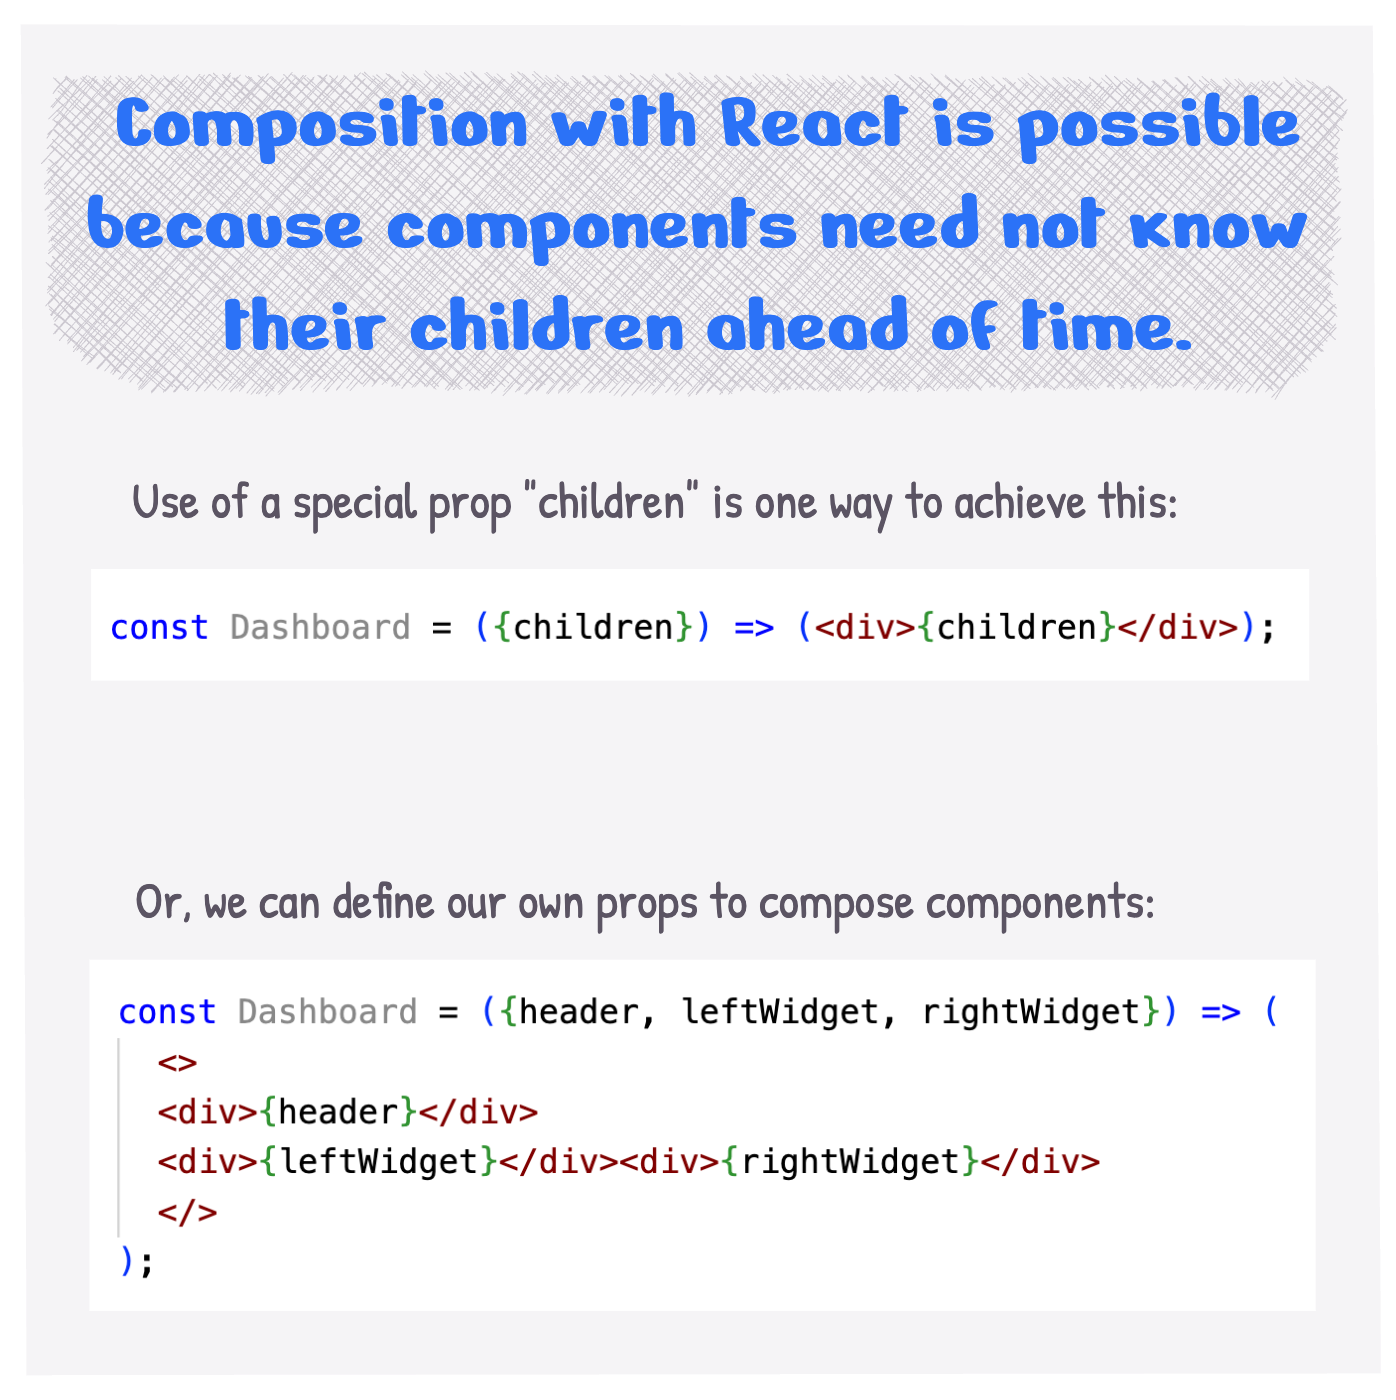 What React feature enables us to leverage composition?